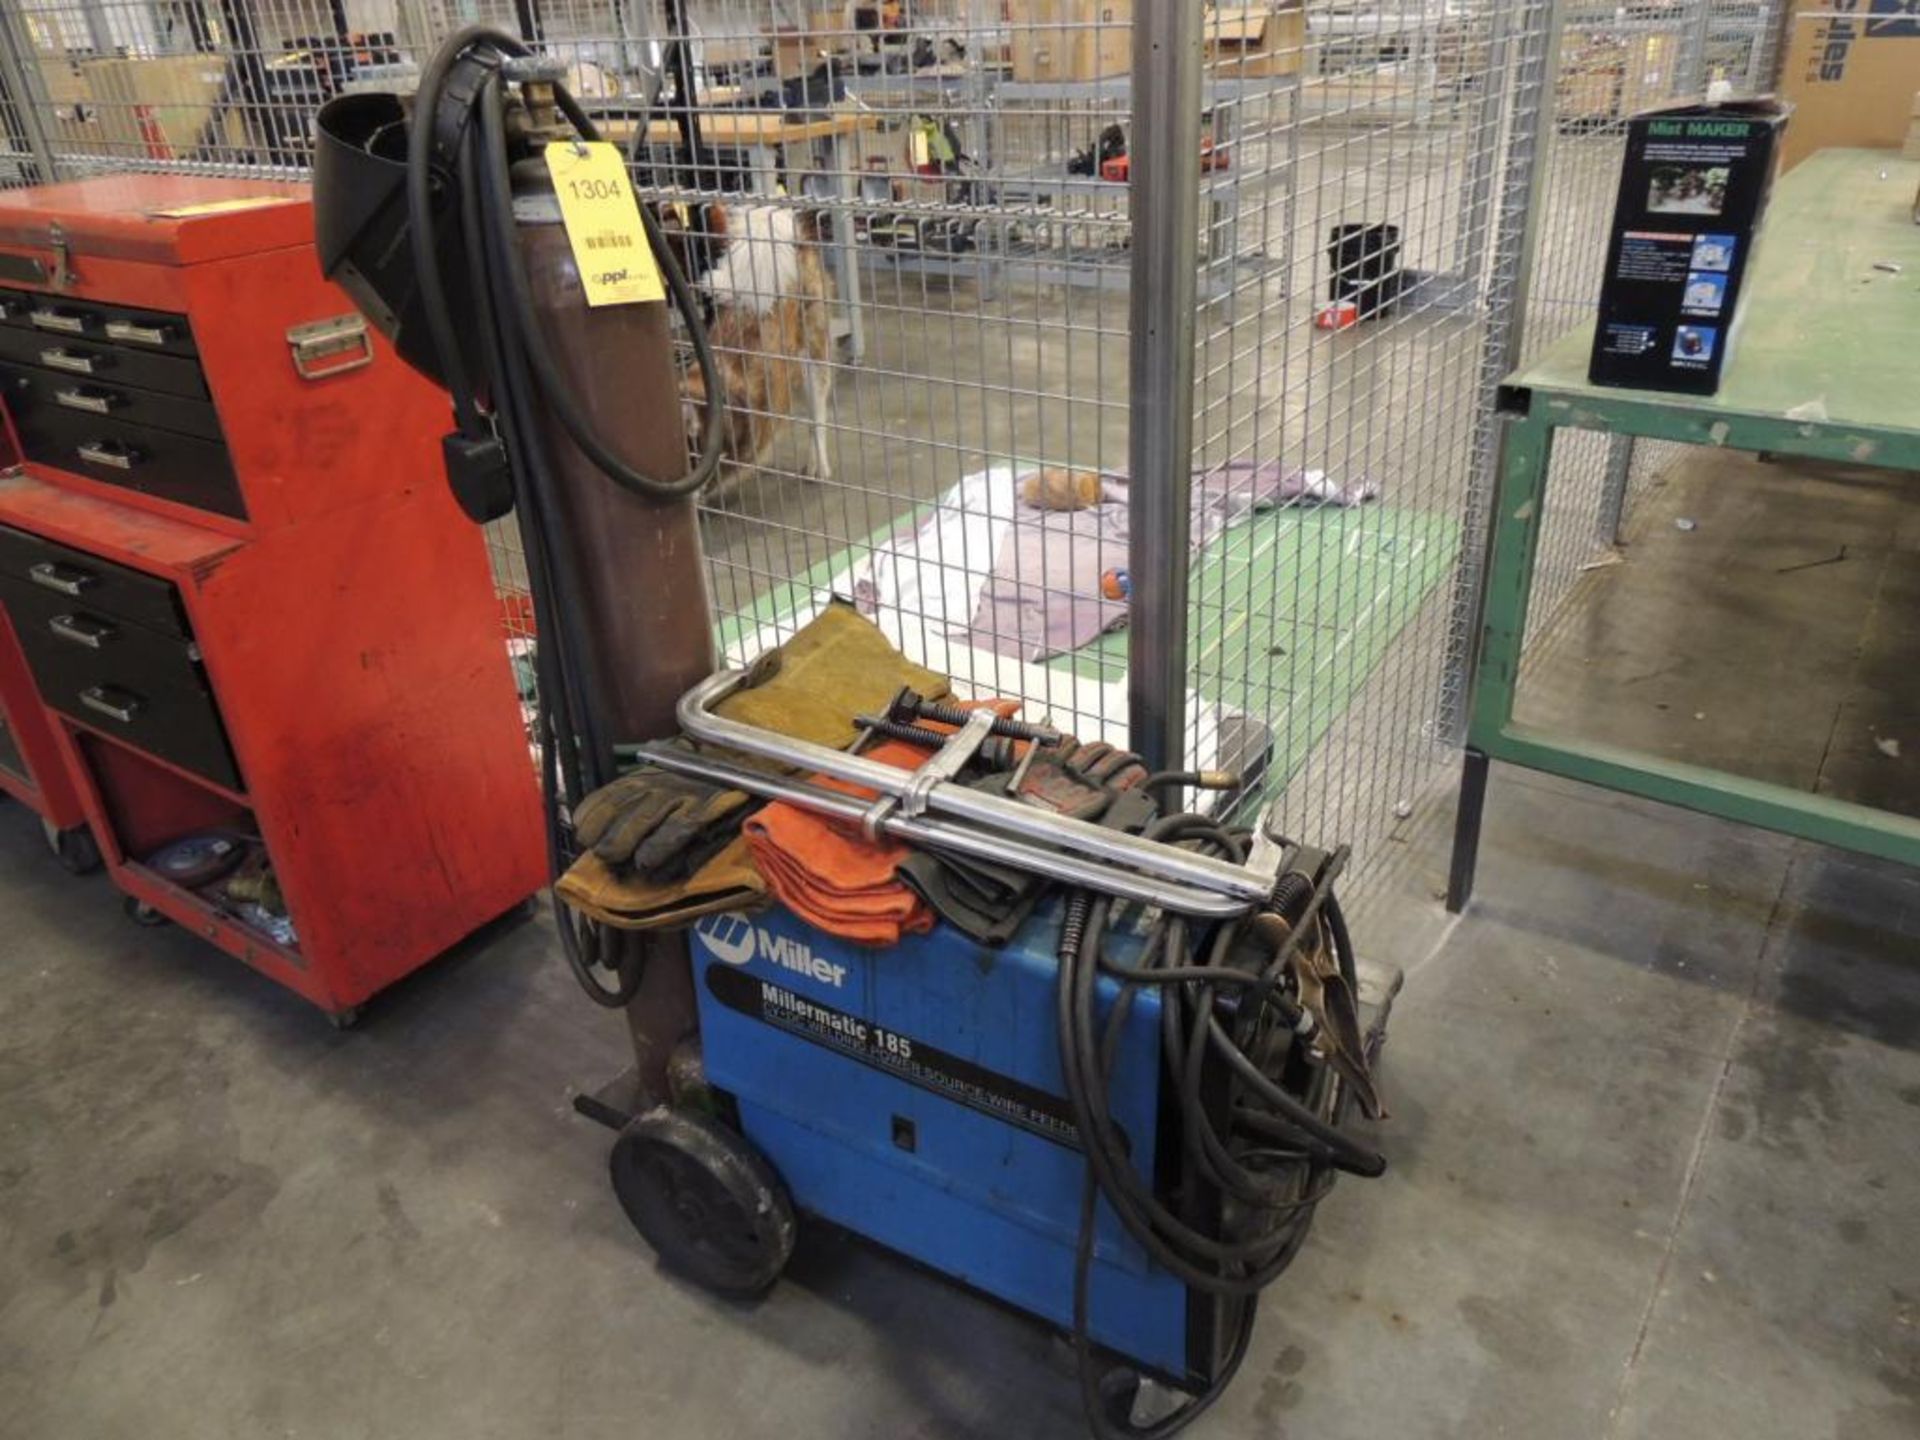 LOT: Miller Millermatic 185 Wire Feed, with Helmet & Welding Clamps